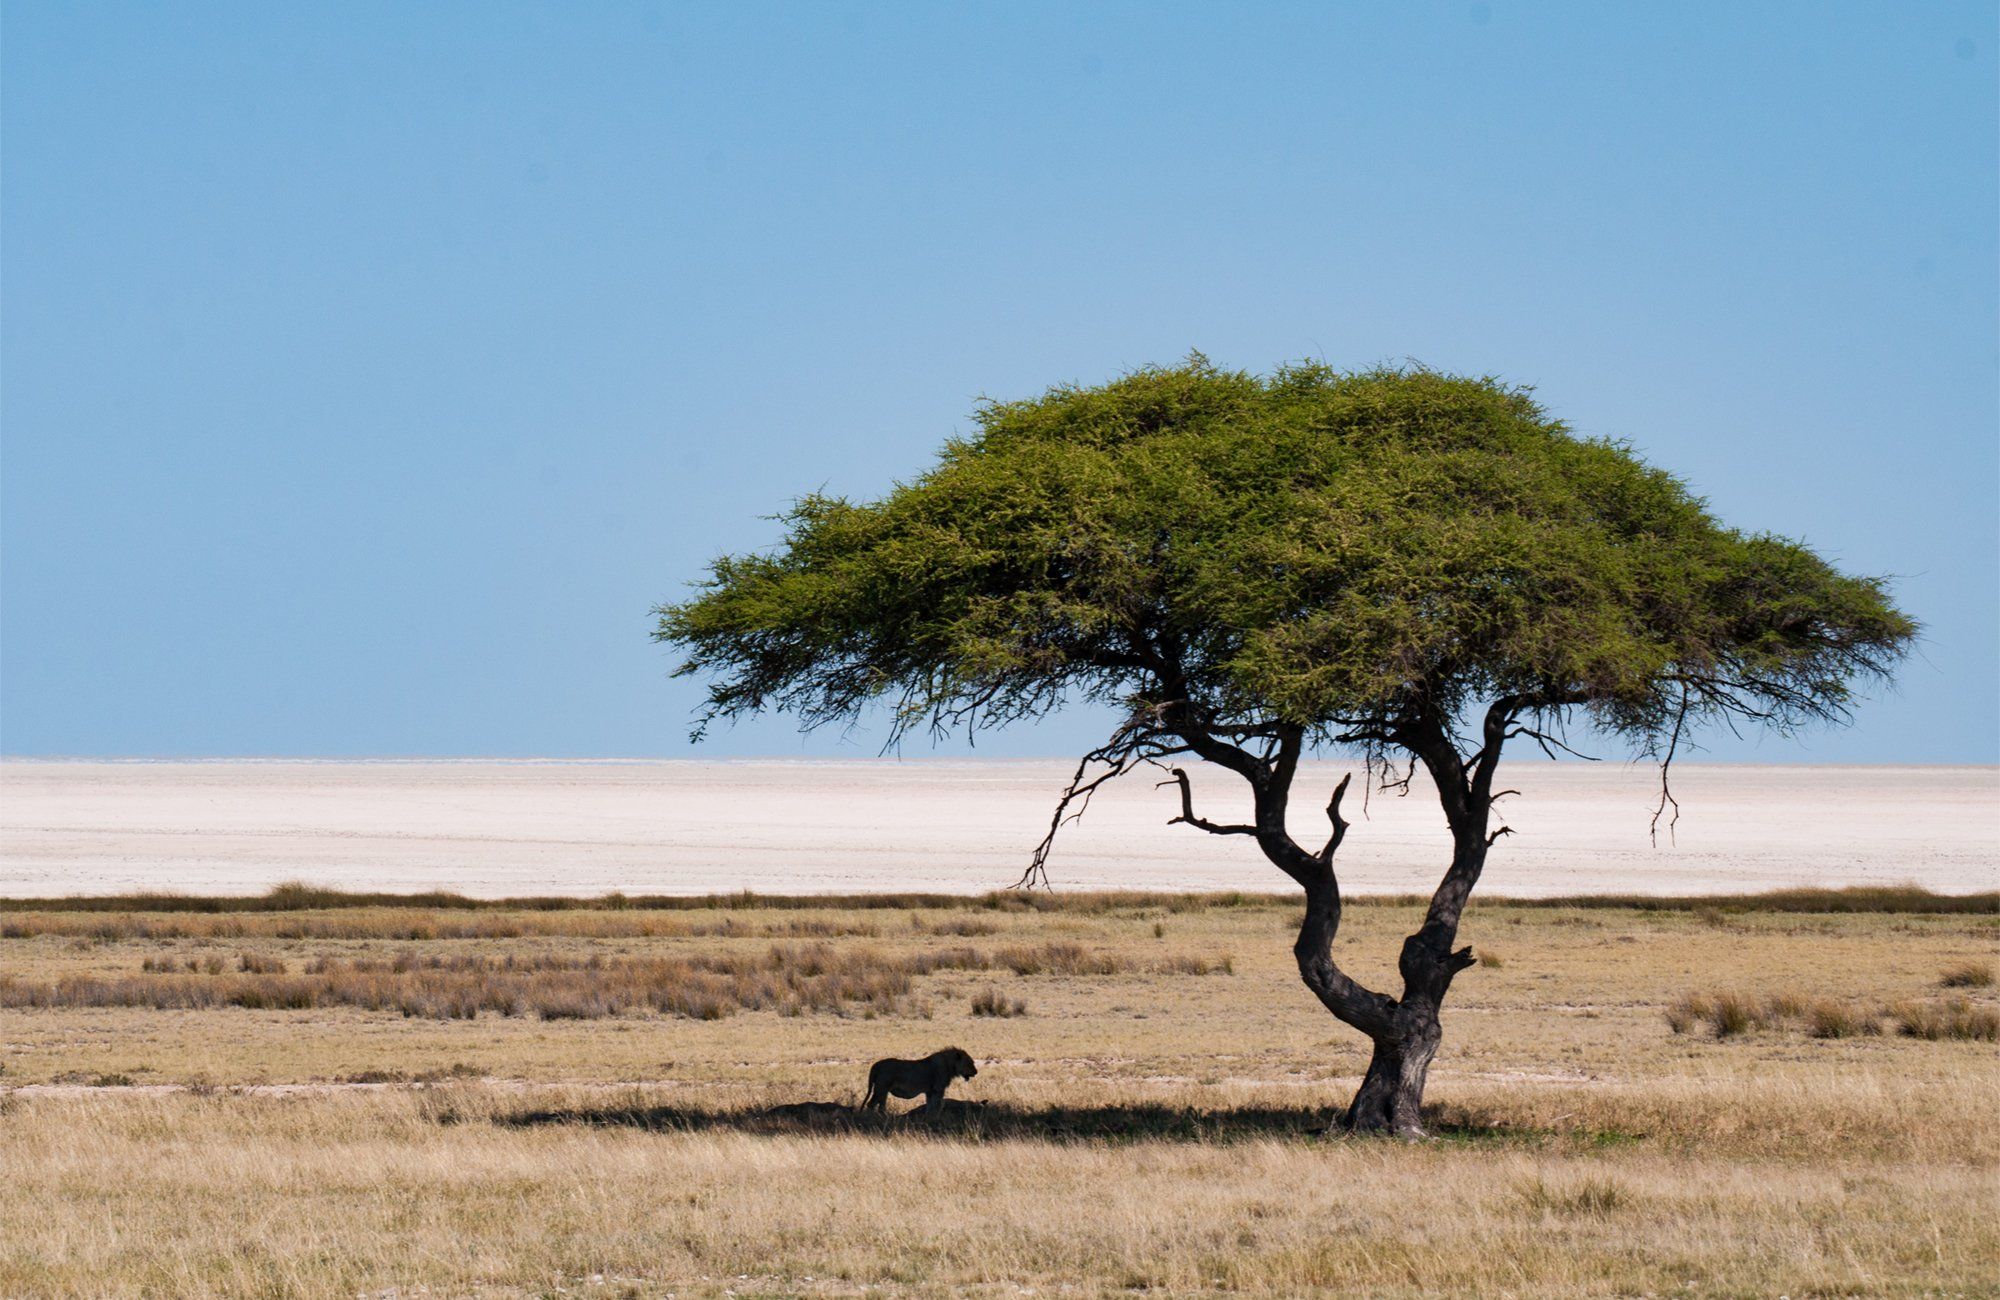 Namibia, the jewel of the desert